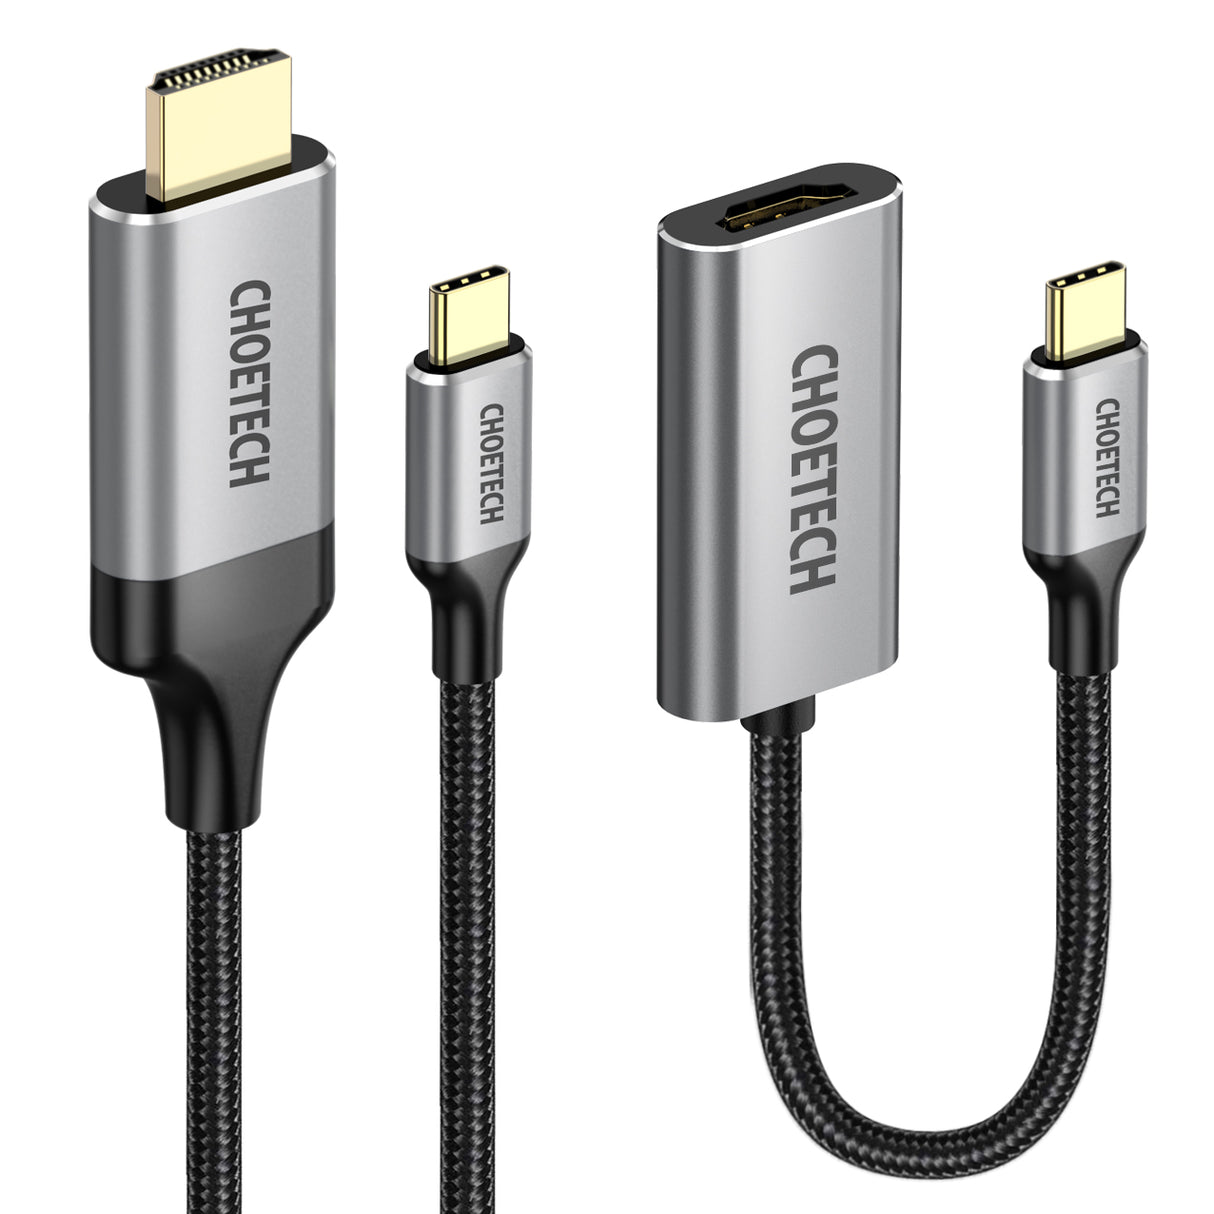 CH0033 Choetech USB C to HDMI Cable(4K@60Hz), 6.5ft/2m, USB Type C to HDMI Braided Adapter Thunderbolt 3 Cable